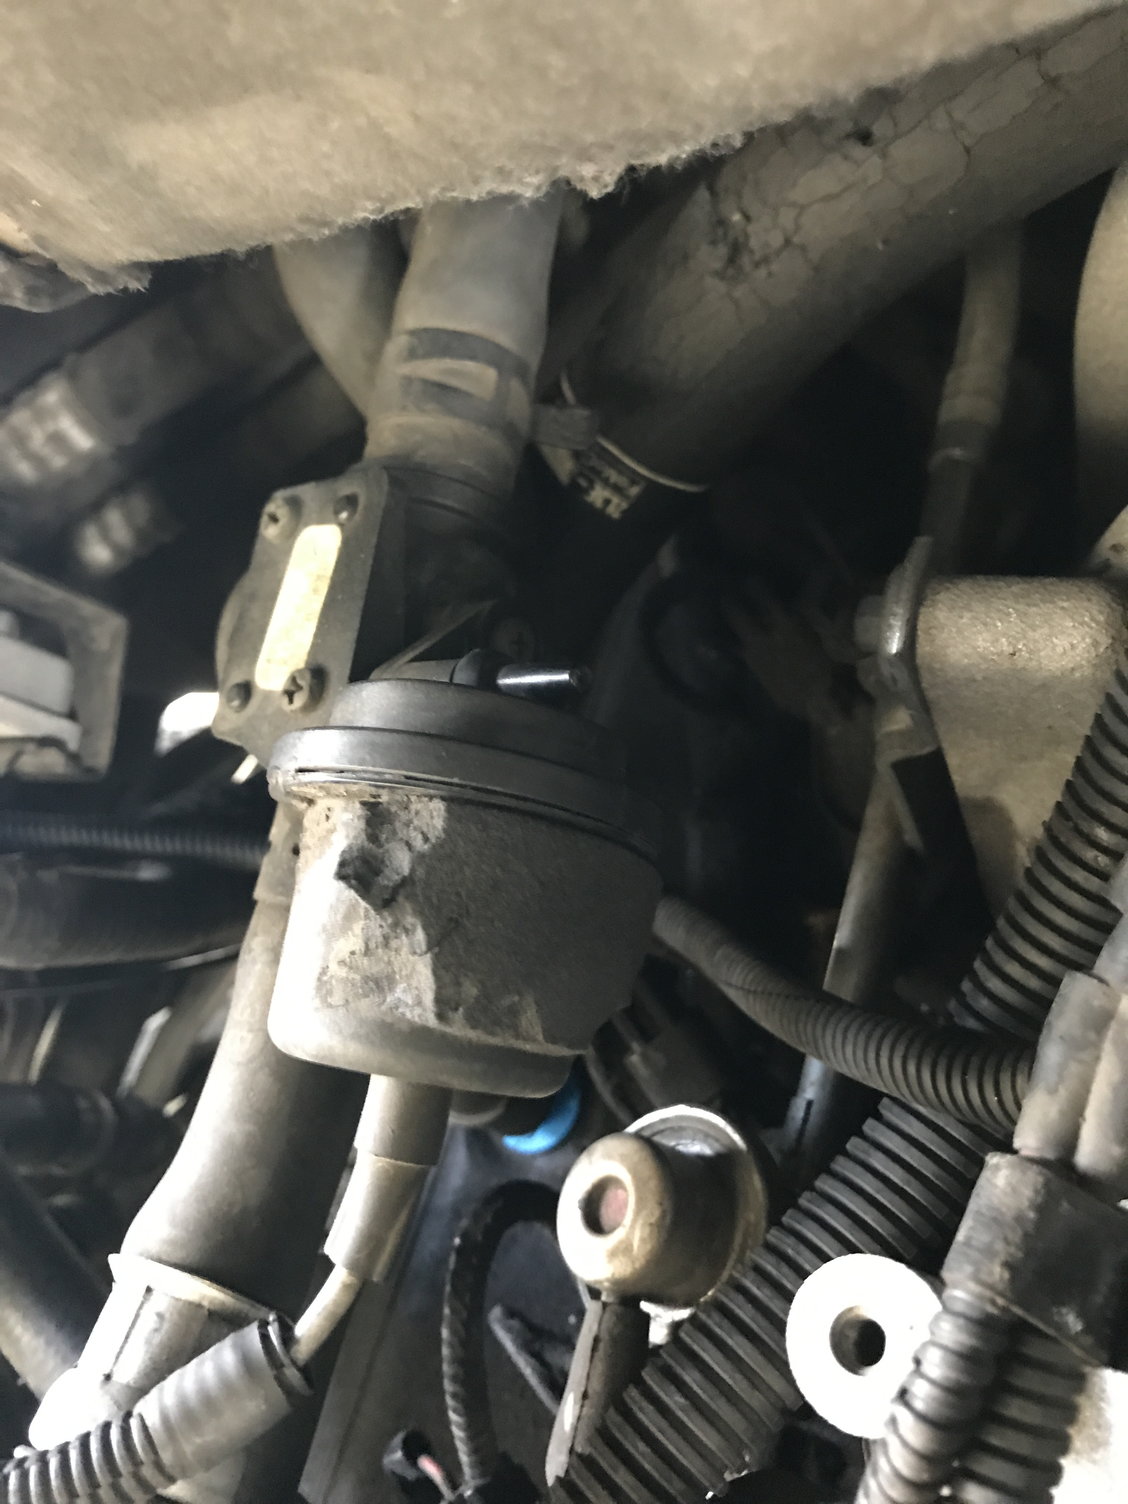 2003 Expedition Vacuum line trouble - Ford Truck Enthusiasts Forums